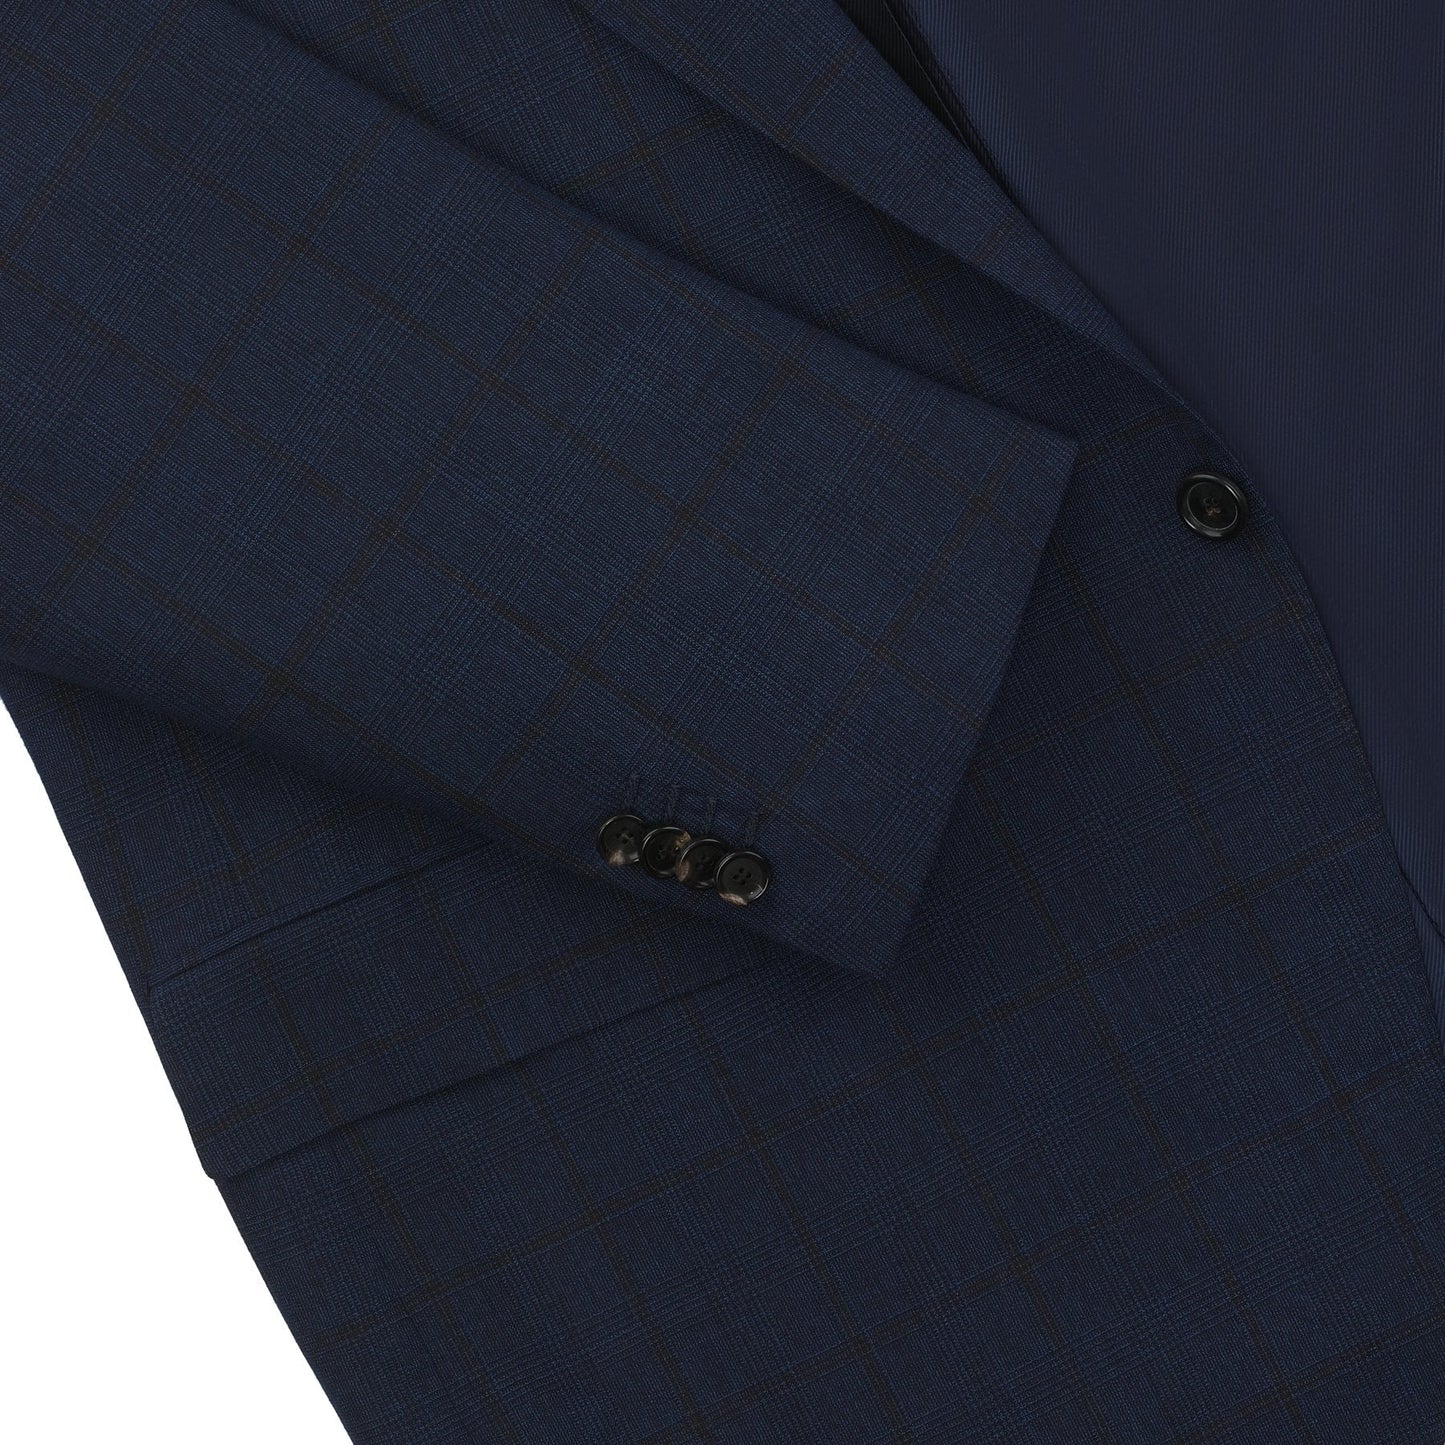 Cesare Attolini Single-Breasted Glen-Check Wool and Cashmere-Blend Suit in Dark Blue - SARTALE